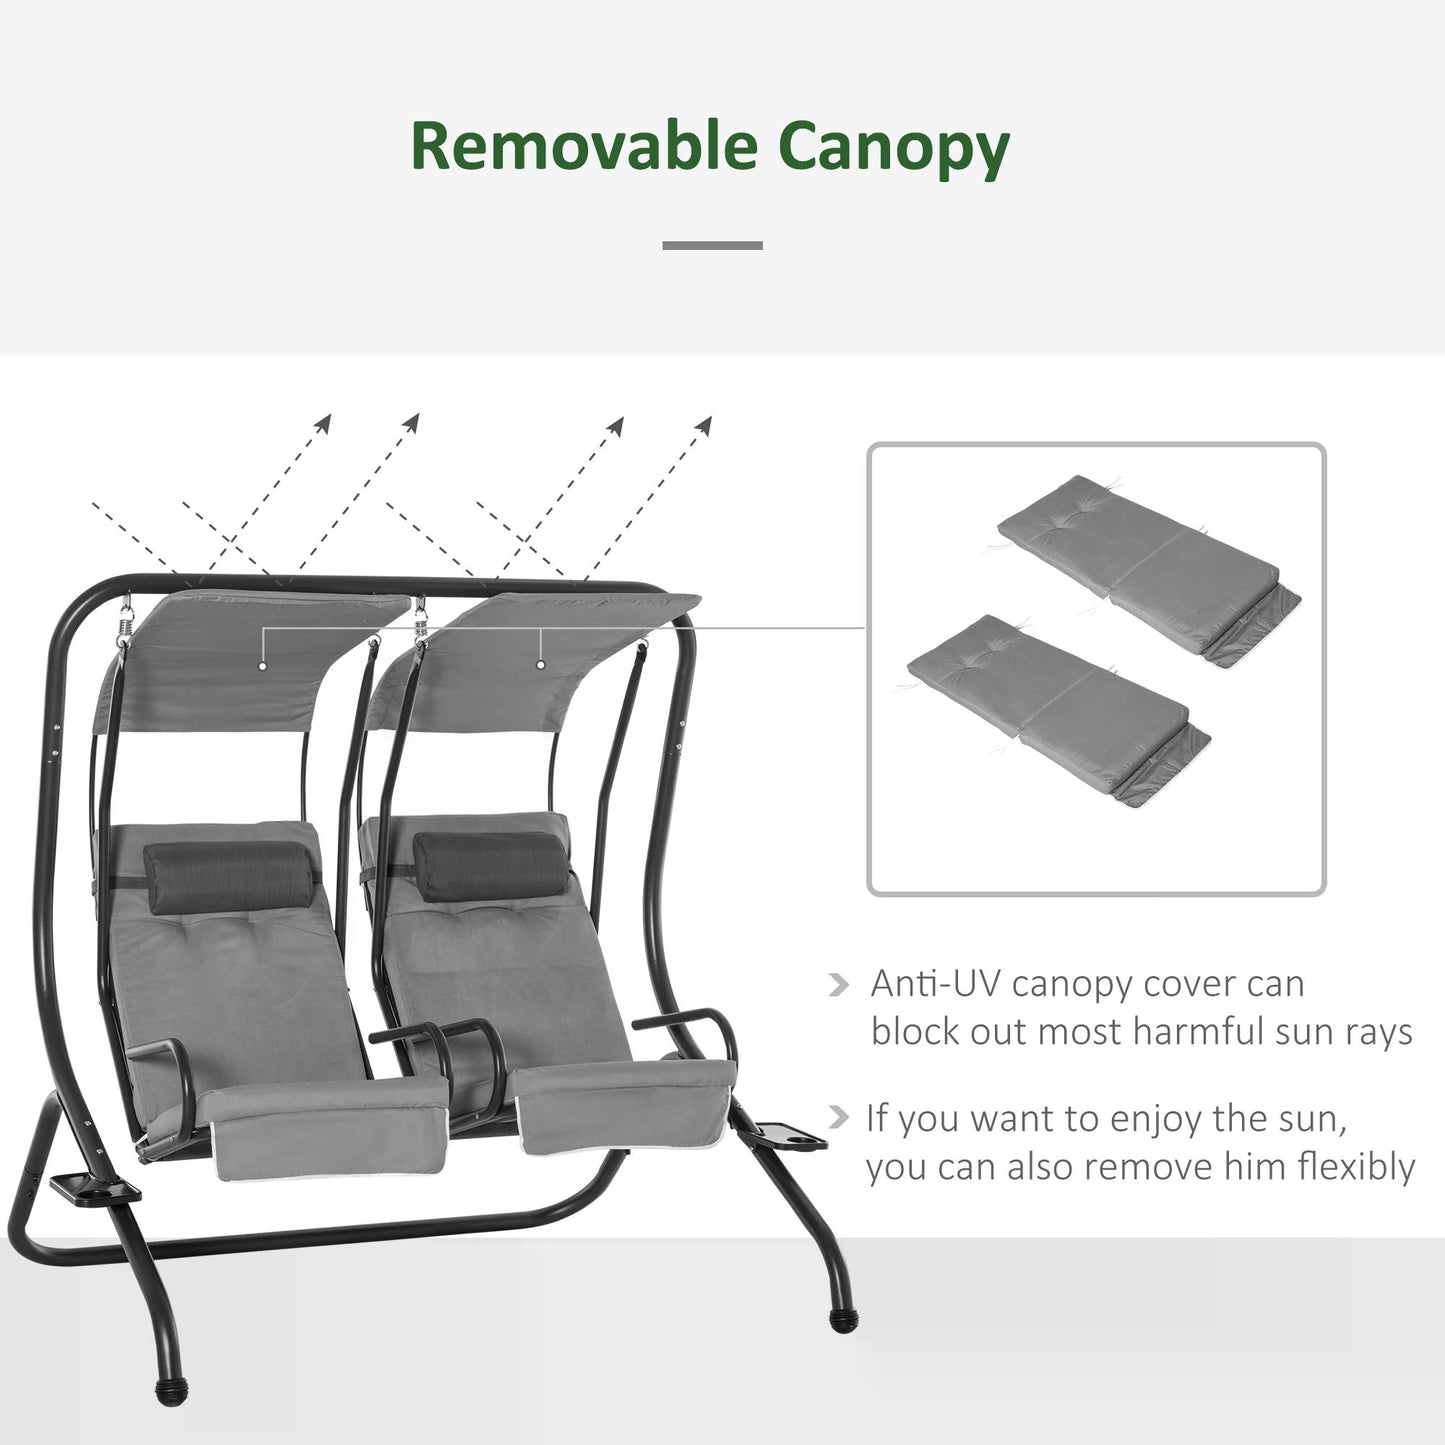 Outsunny Double Seat Swing Chair Modern Garden Swing w/ 2 Separate Relax Chairs, Handrails, Headrests and Removable Canopy, Grey